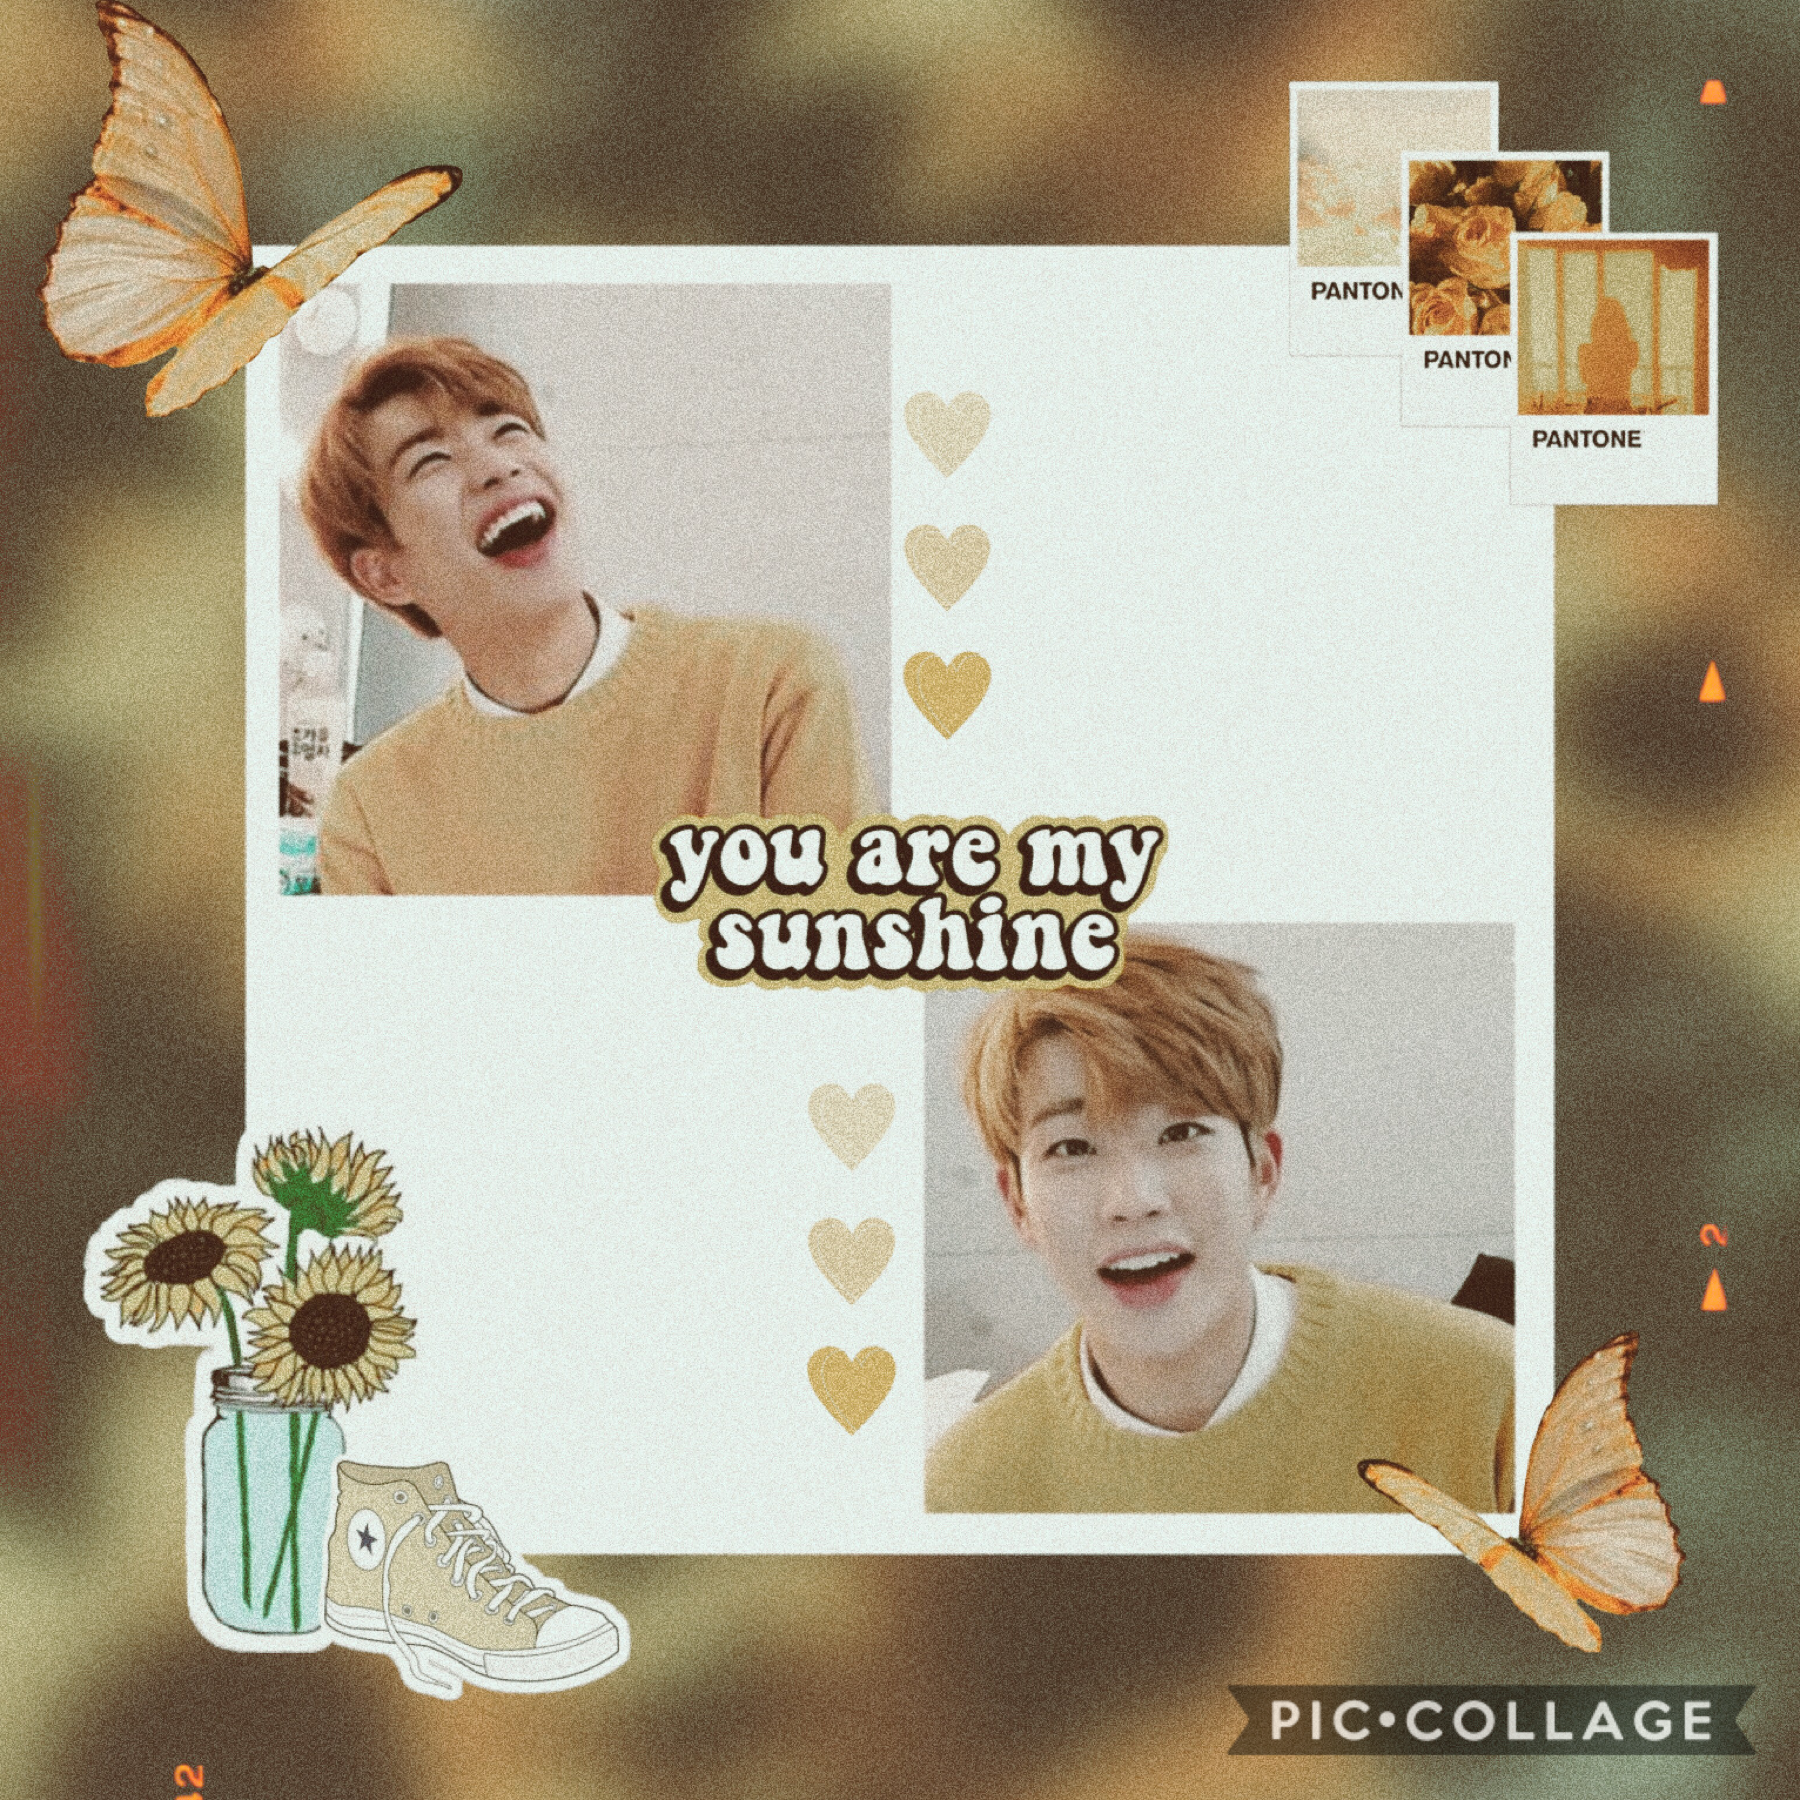 - 🌻 -

MJ from Astro~

He’s so cute 🥺

Sorry Seungmin but can he be my sunshine just for a lil bit?